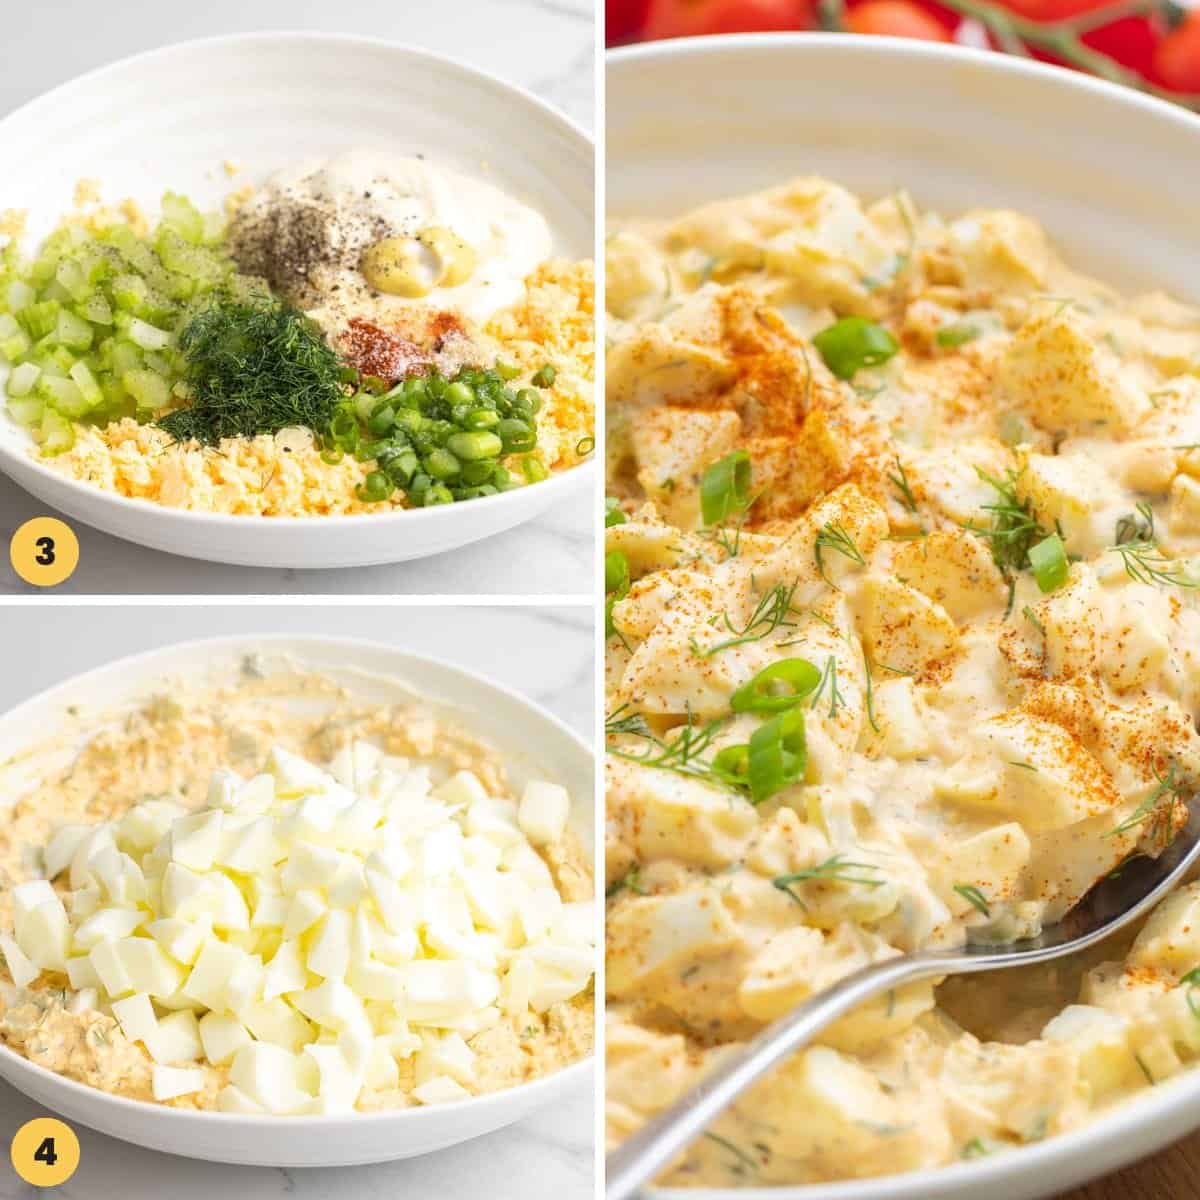 A collage of three images showing how to make egg salad.